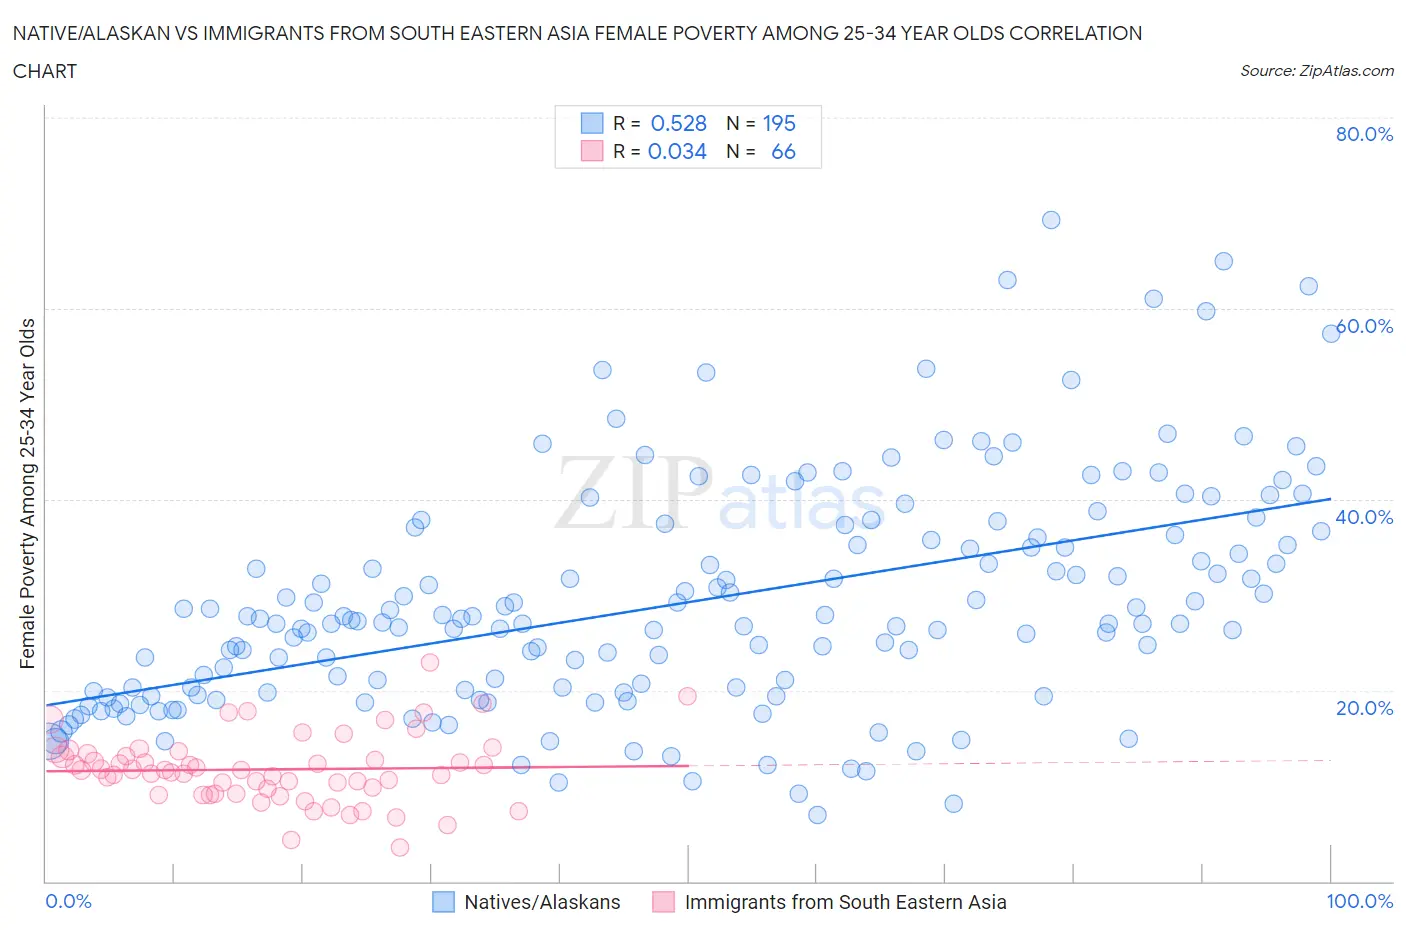 Native/Alaskan vs Immigrants from South Eastern Asia Female Poverty Among 25-34 Year Olds